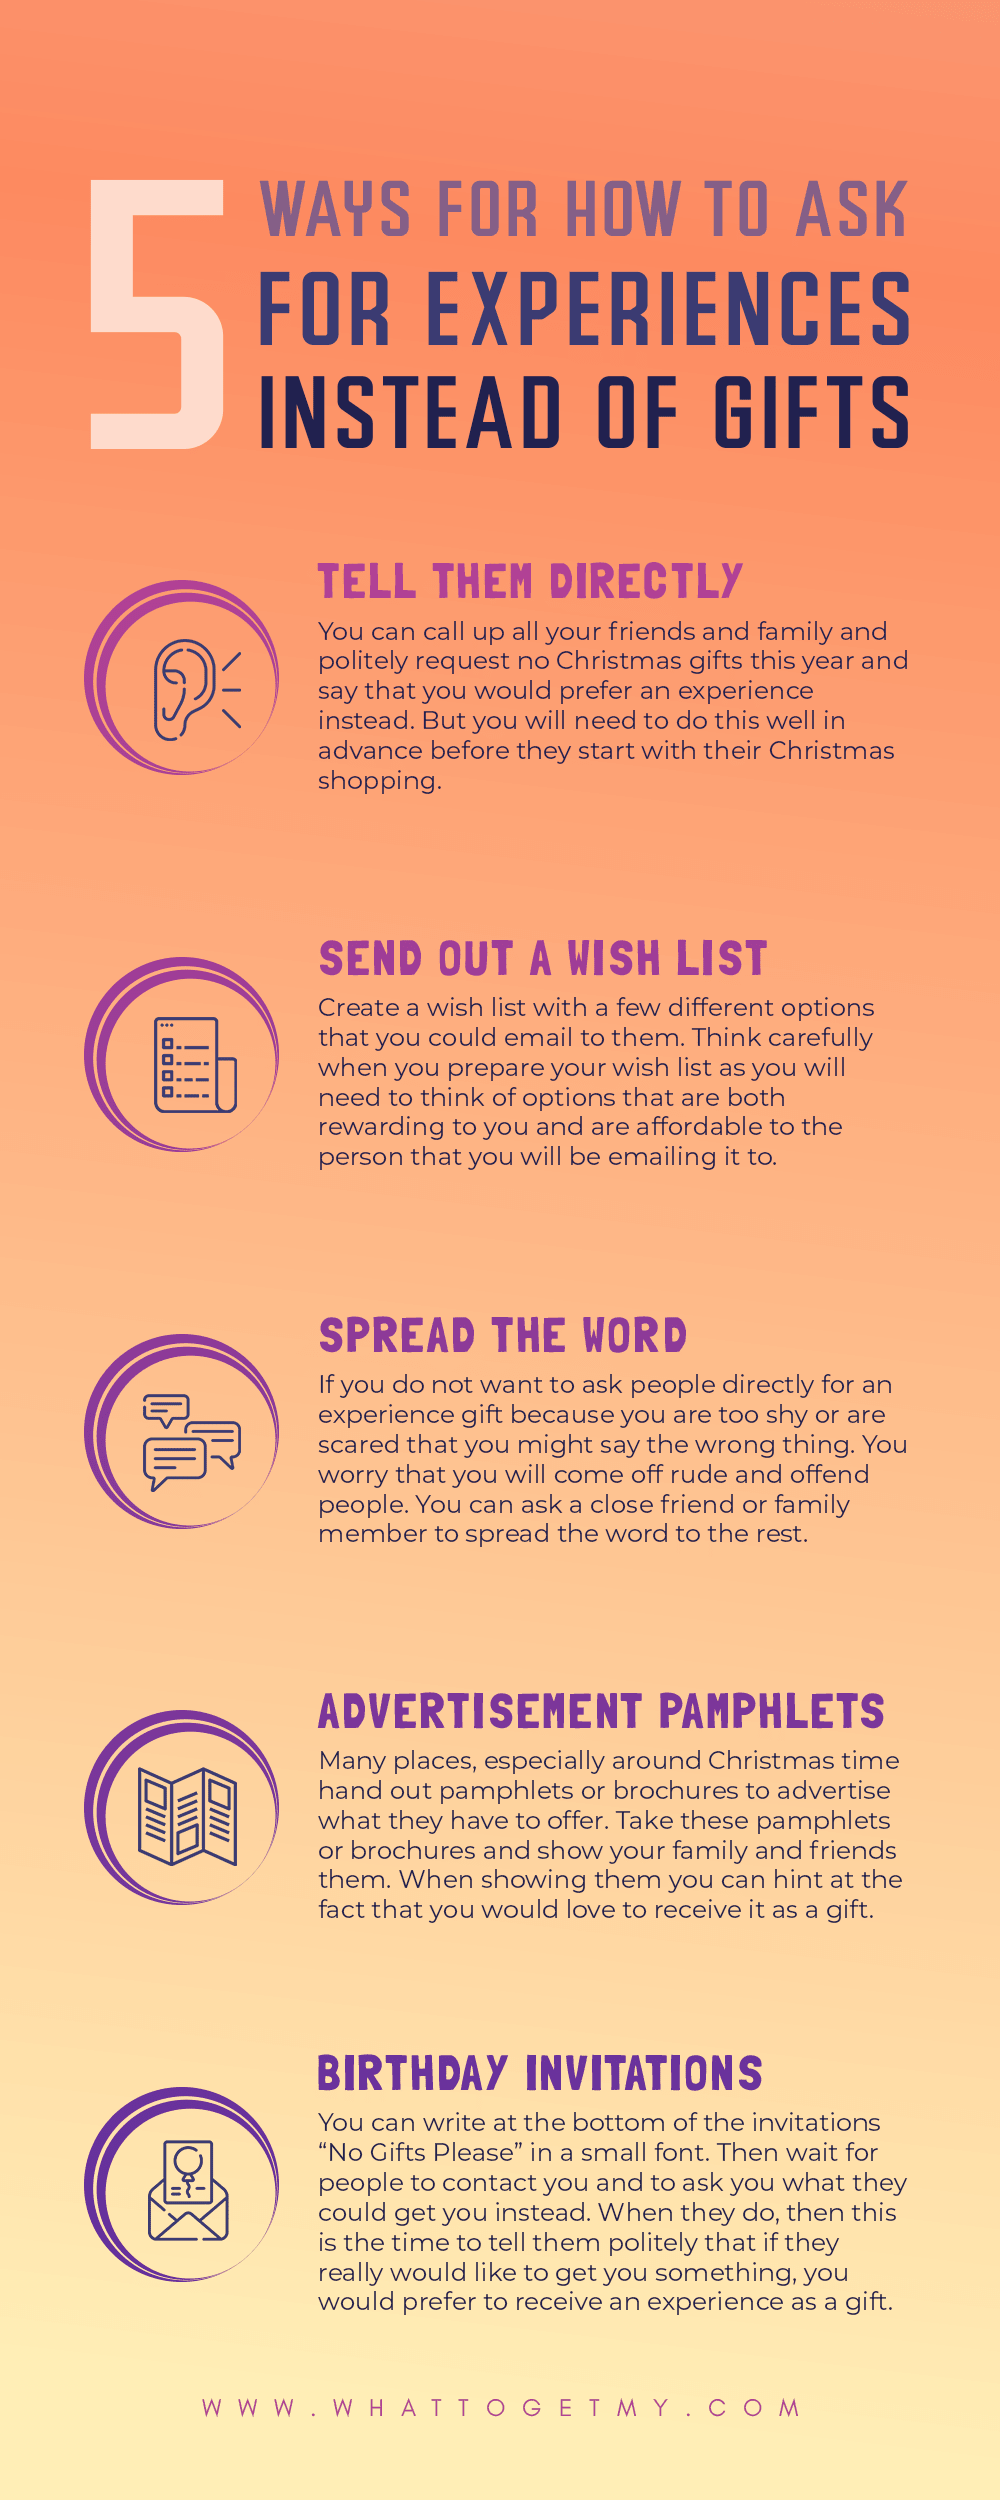 Infographic 5 ways for How to Ask for Experiences Instead of Gifts